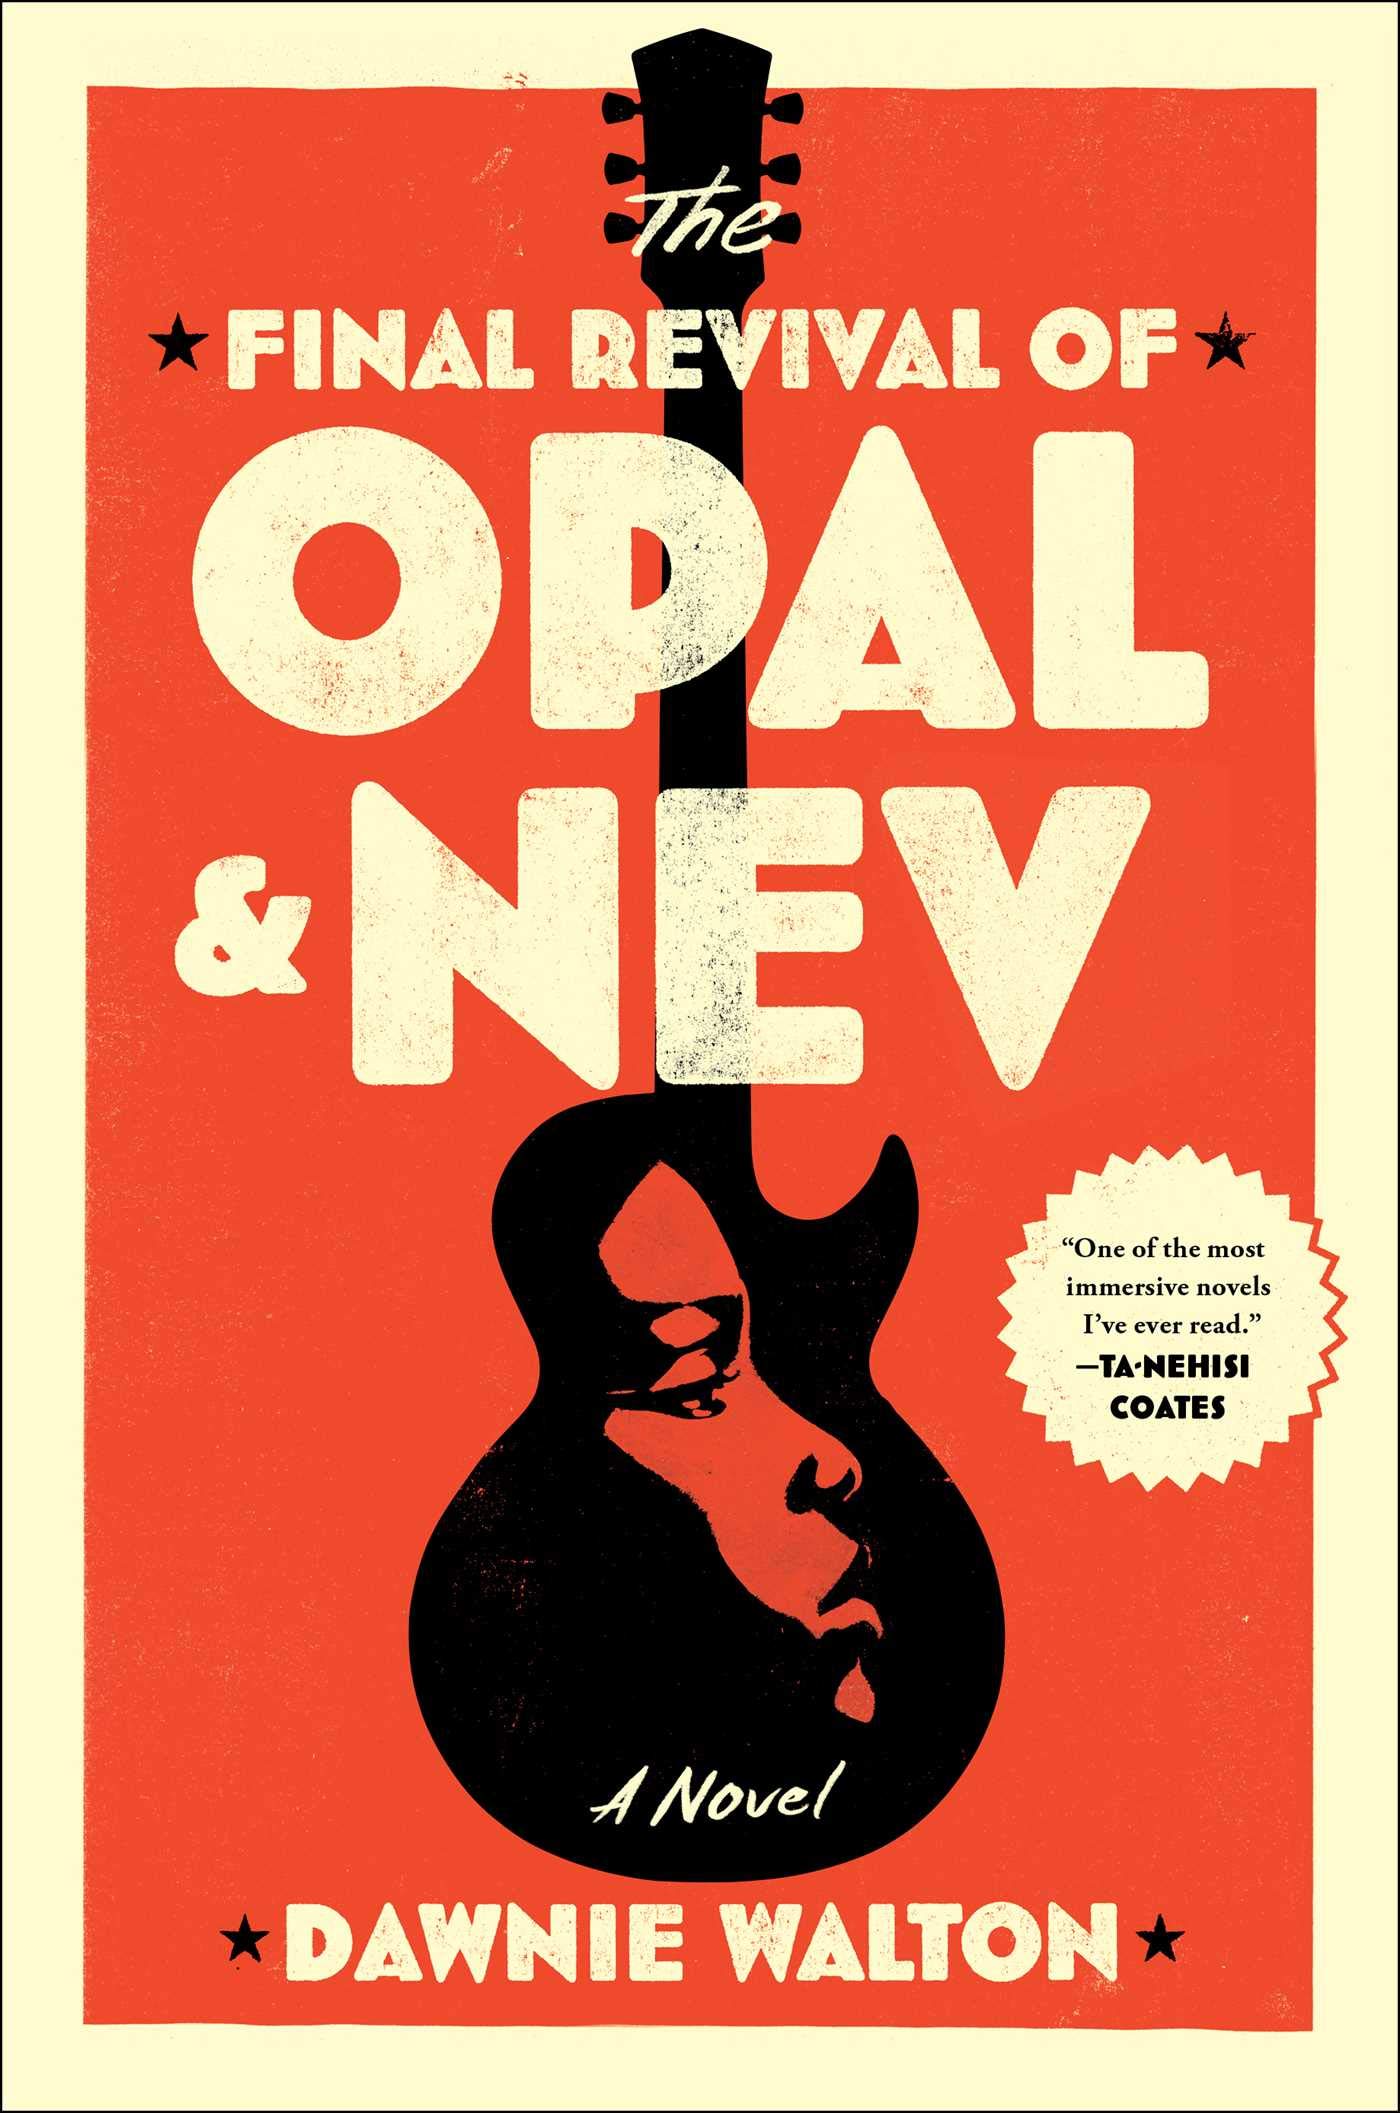 Image for "The Final Revival of Opal & Nev"